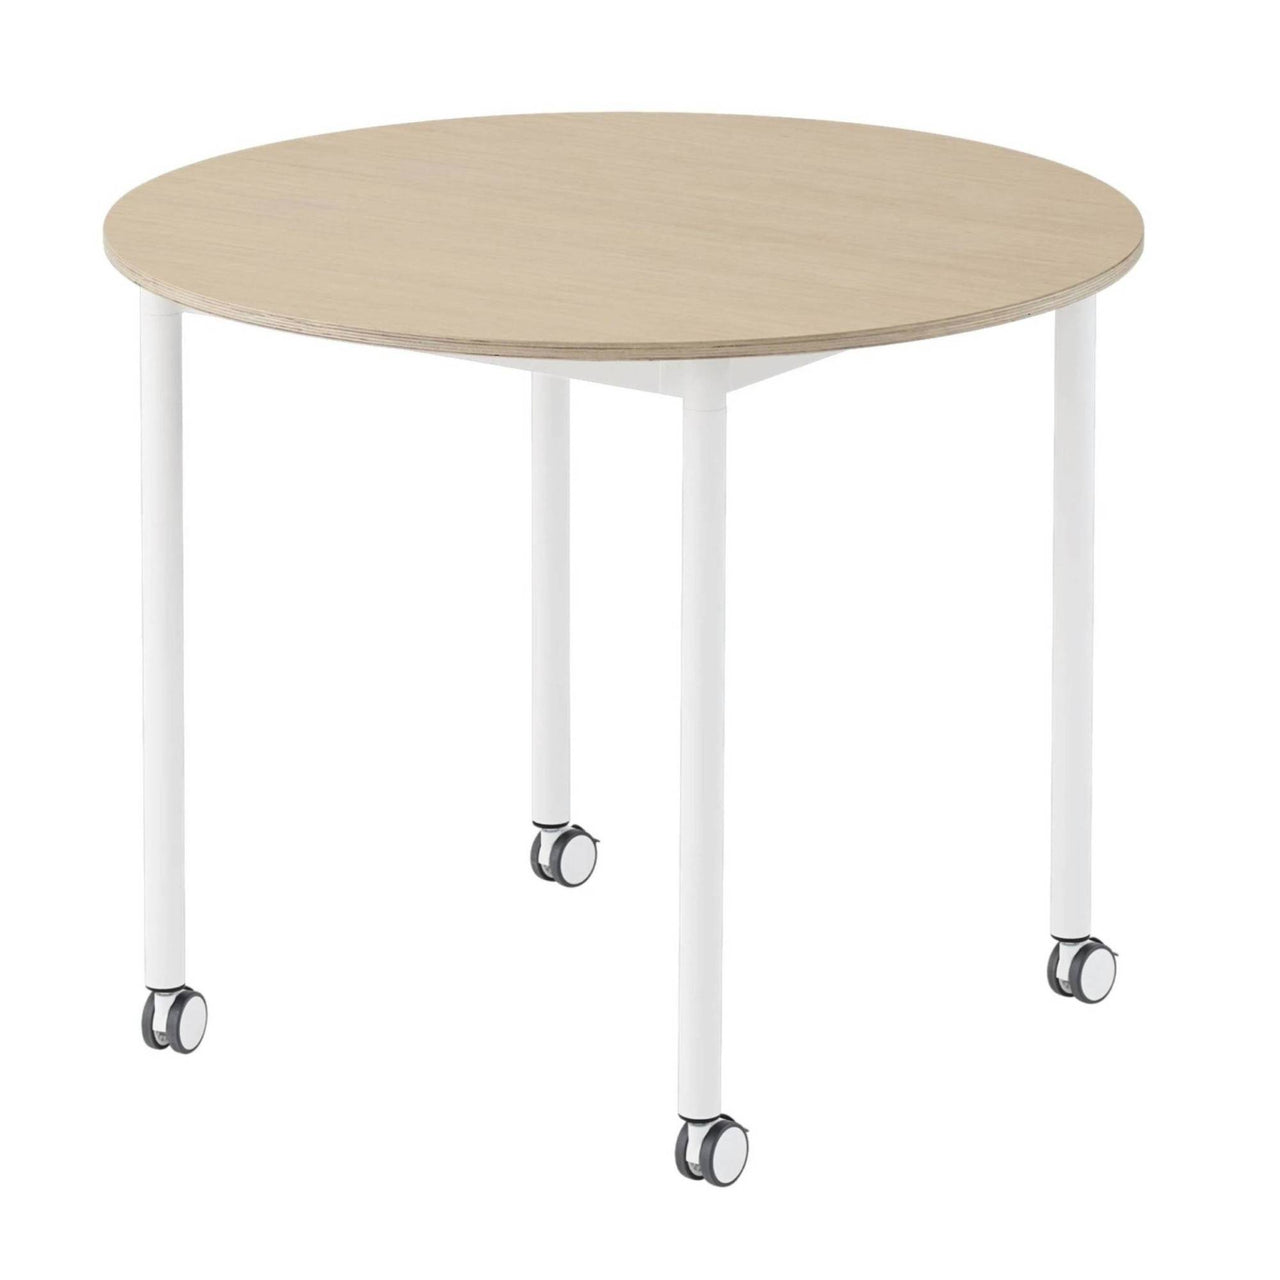 Base Table with Castors: Round + Large - 50.4